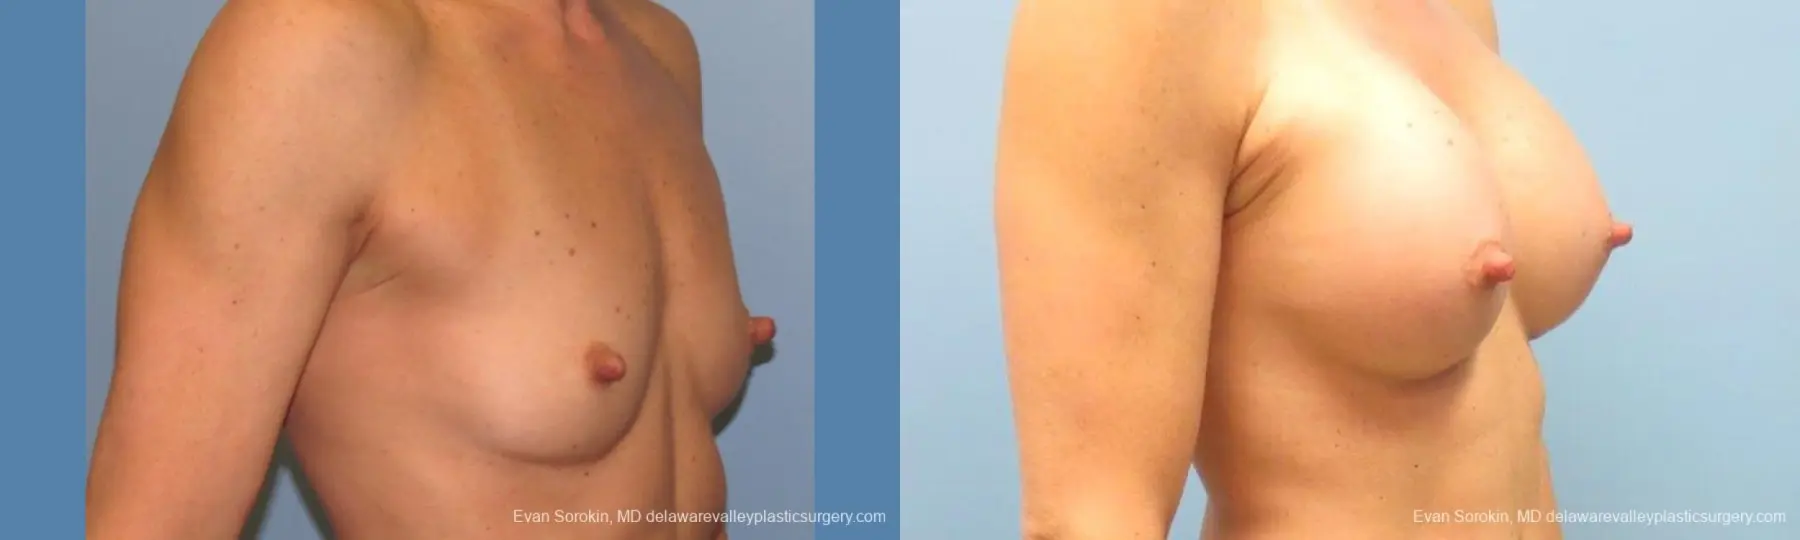 Philadelphia Breast Augmentation 9744 - Before and After 2